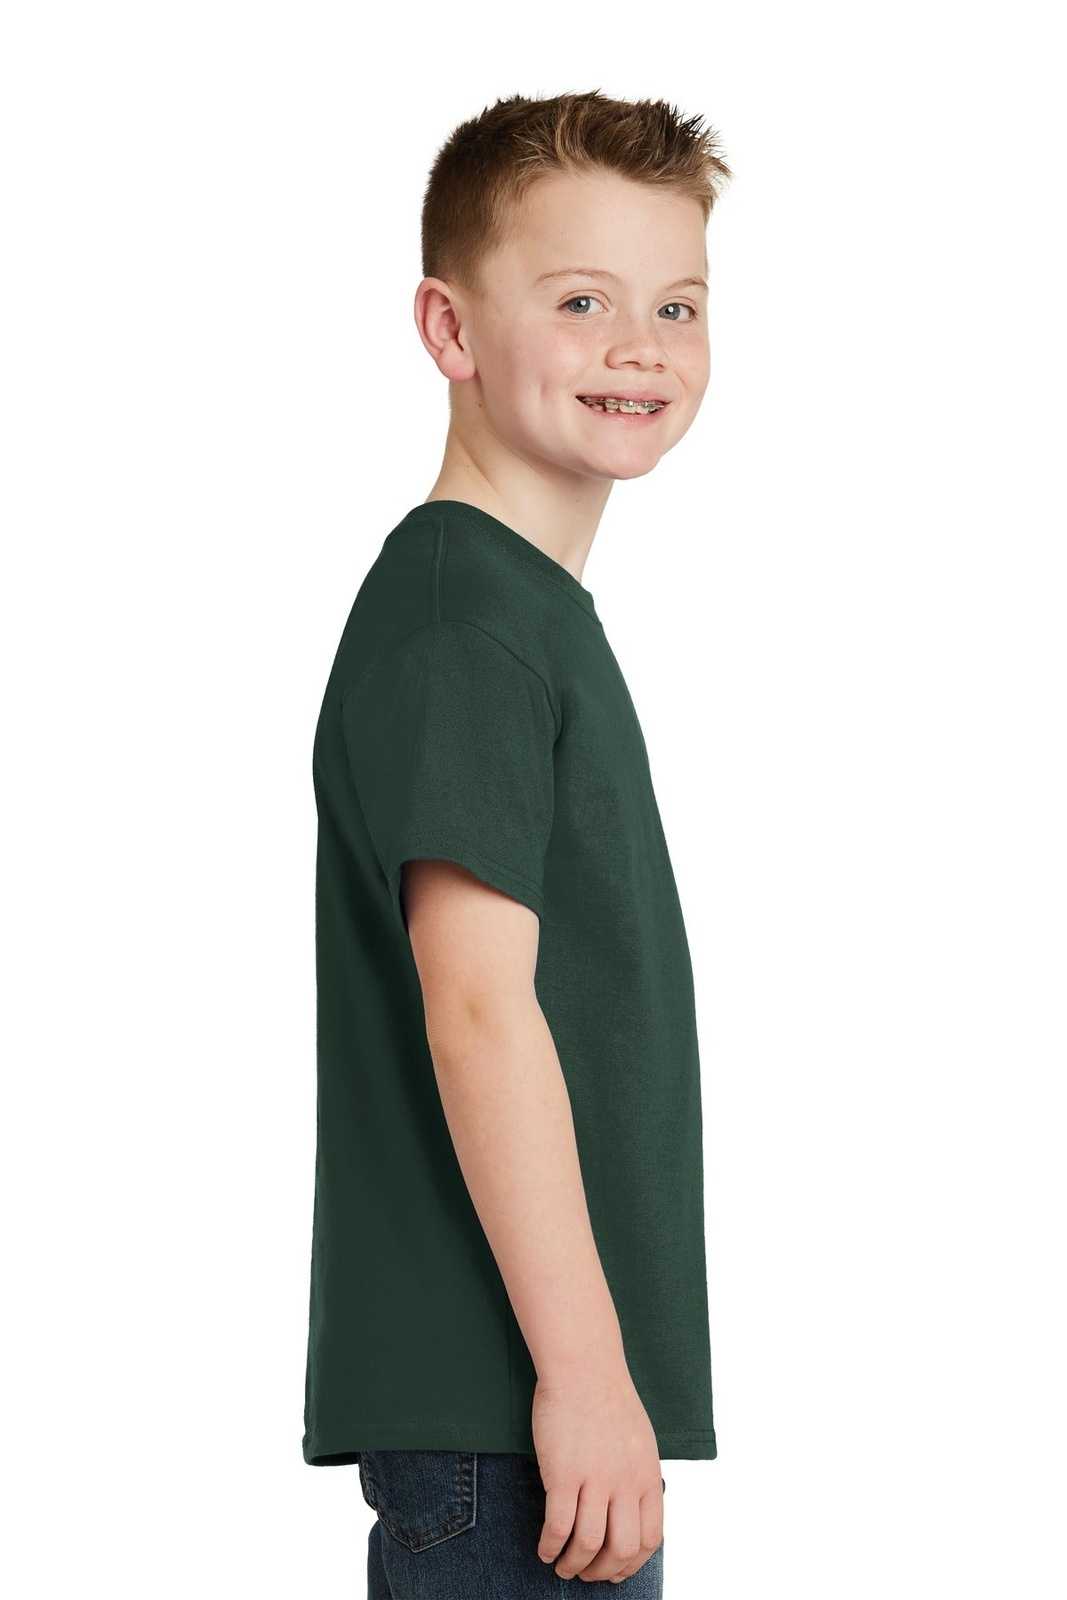 Hanes 5450 Youth Tagless 100% Cotton T-Shirt - Deep Forest - HIT a Double